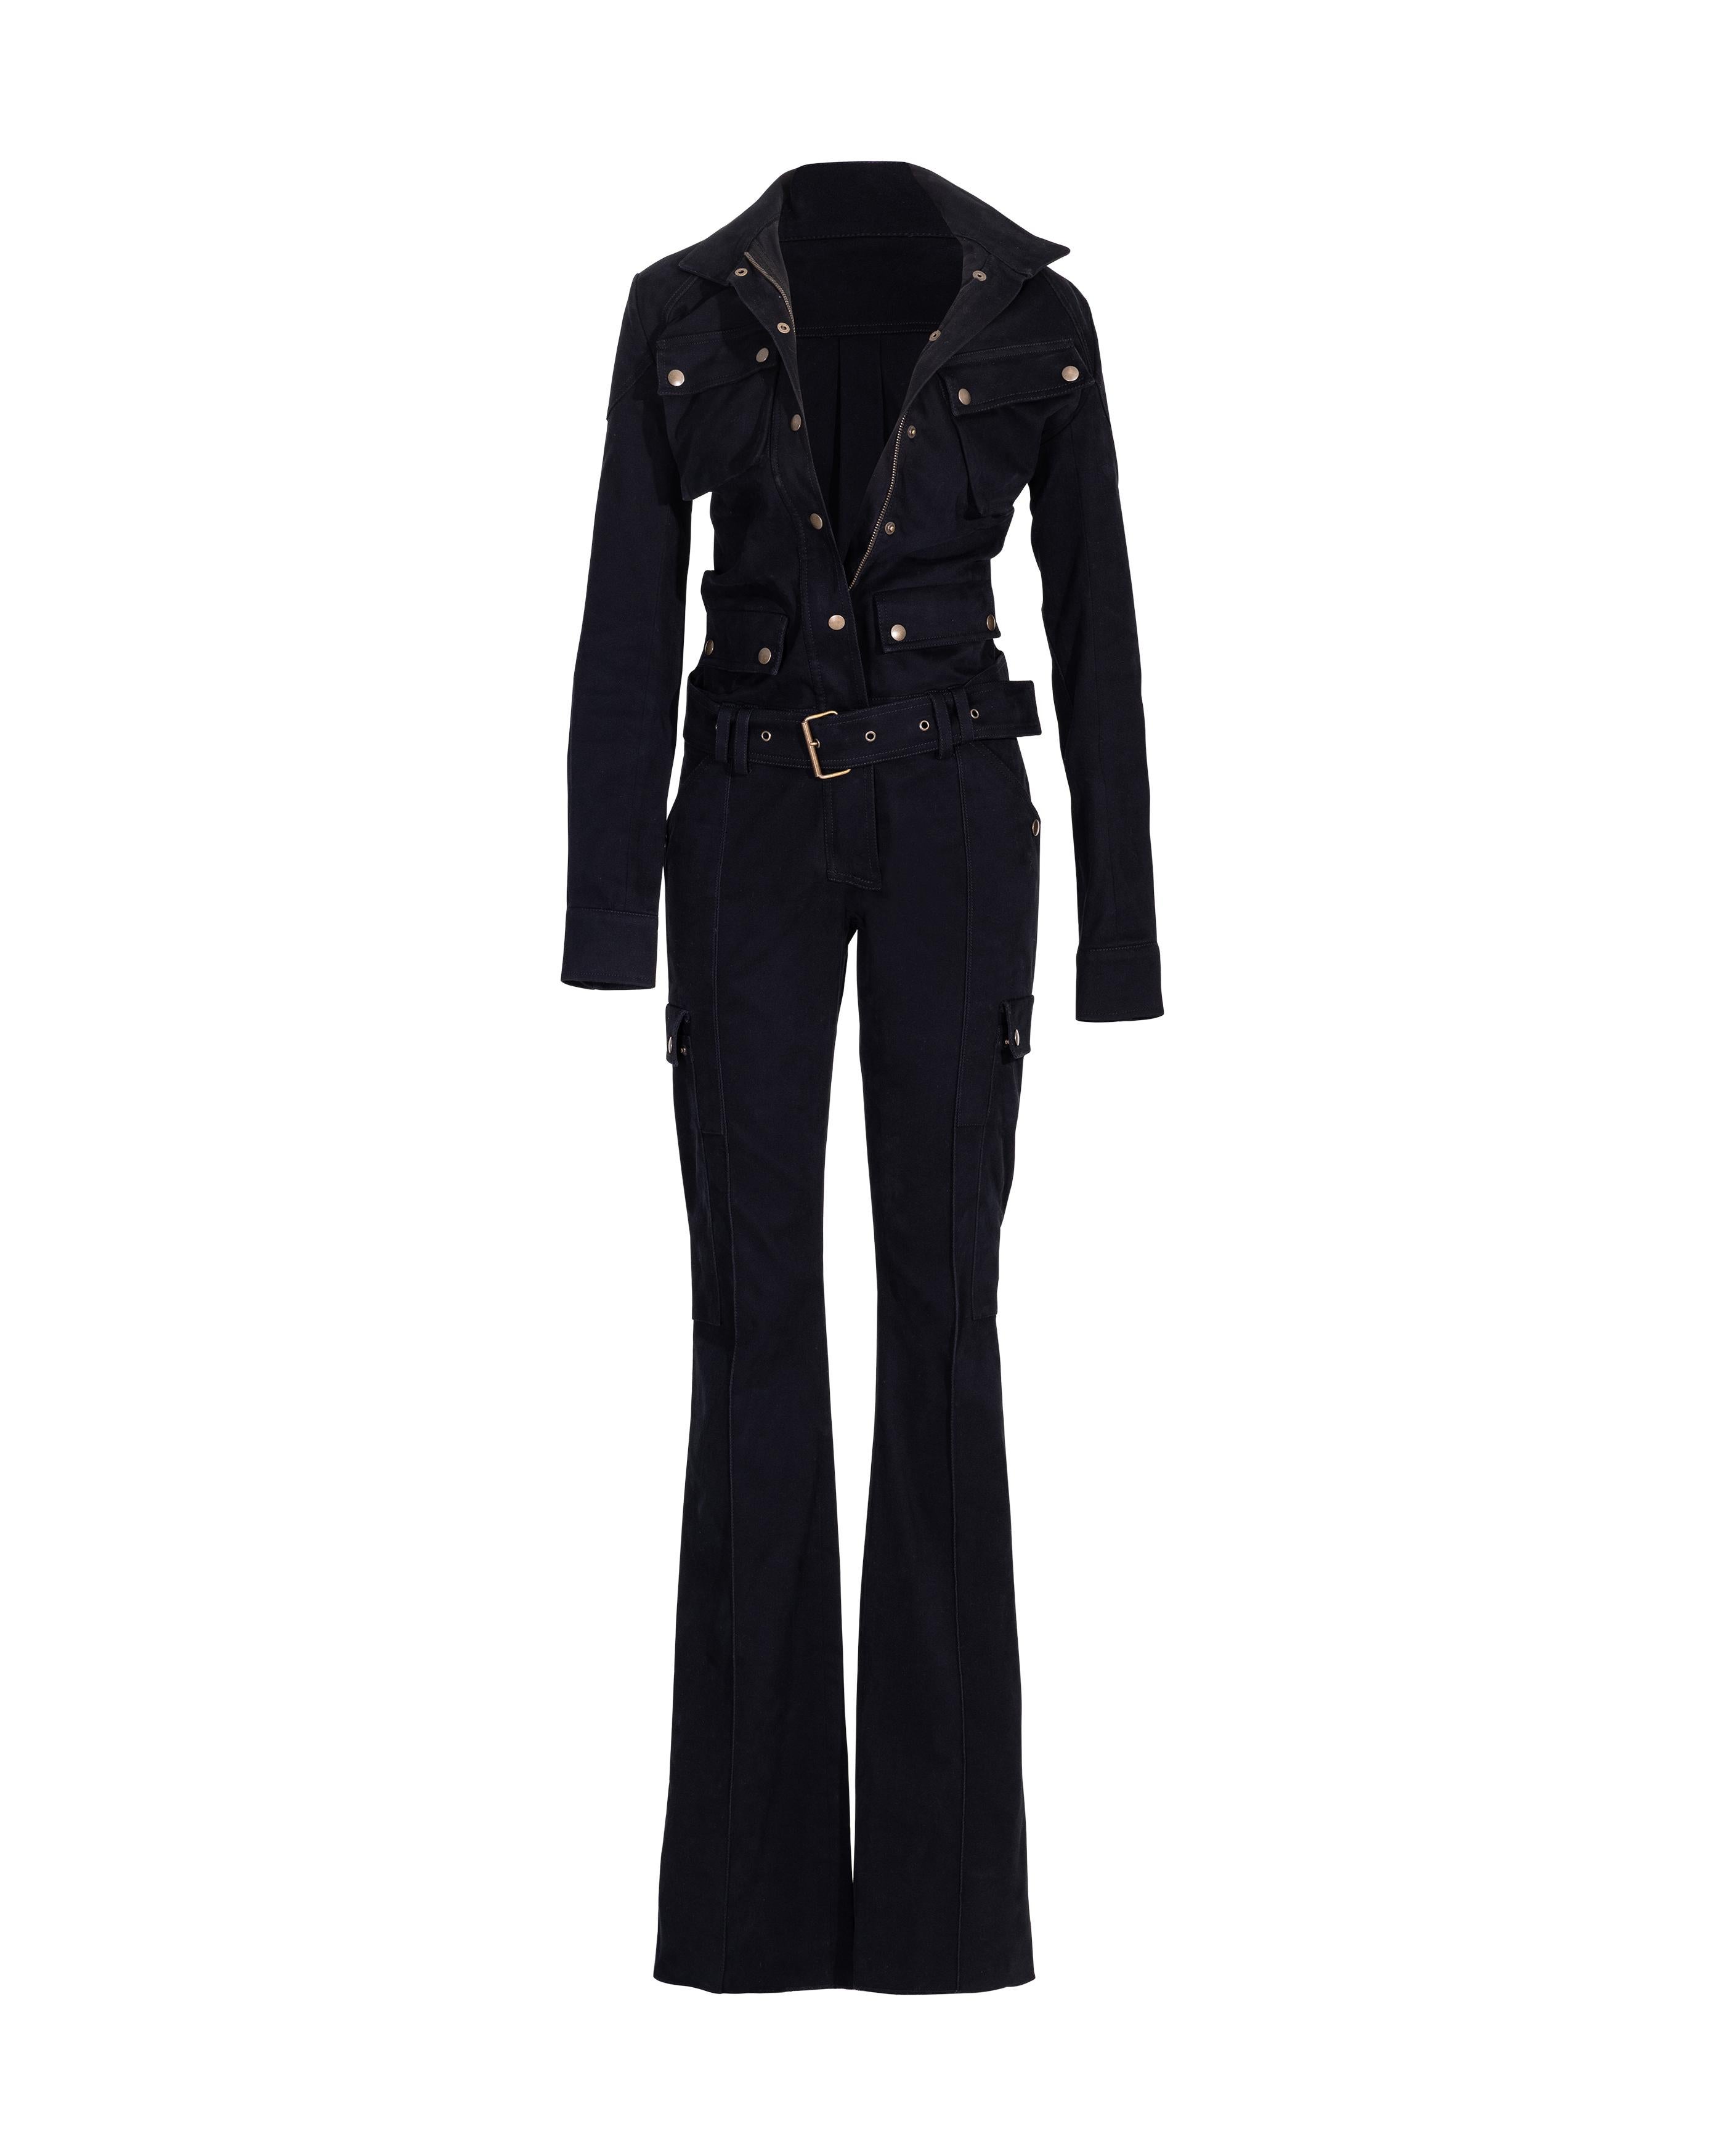 A/W 2001 Balenciaga by Nicolas Ghesquiere Black Jumpsuit with Bronze Hardware 4